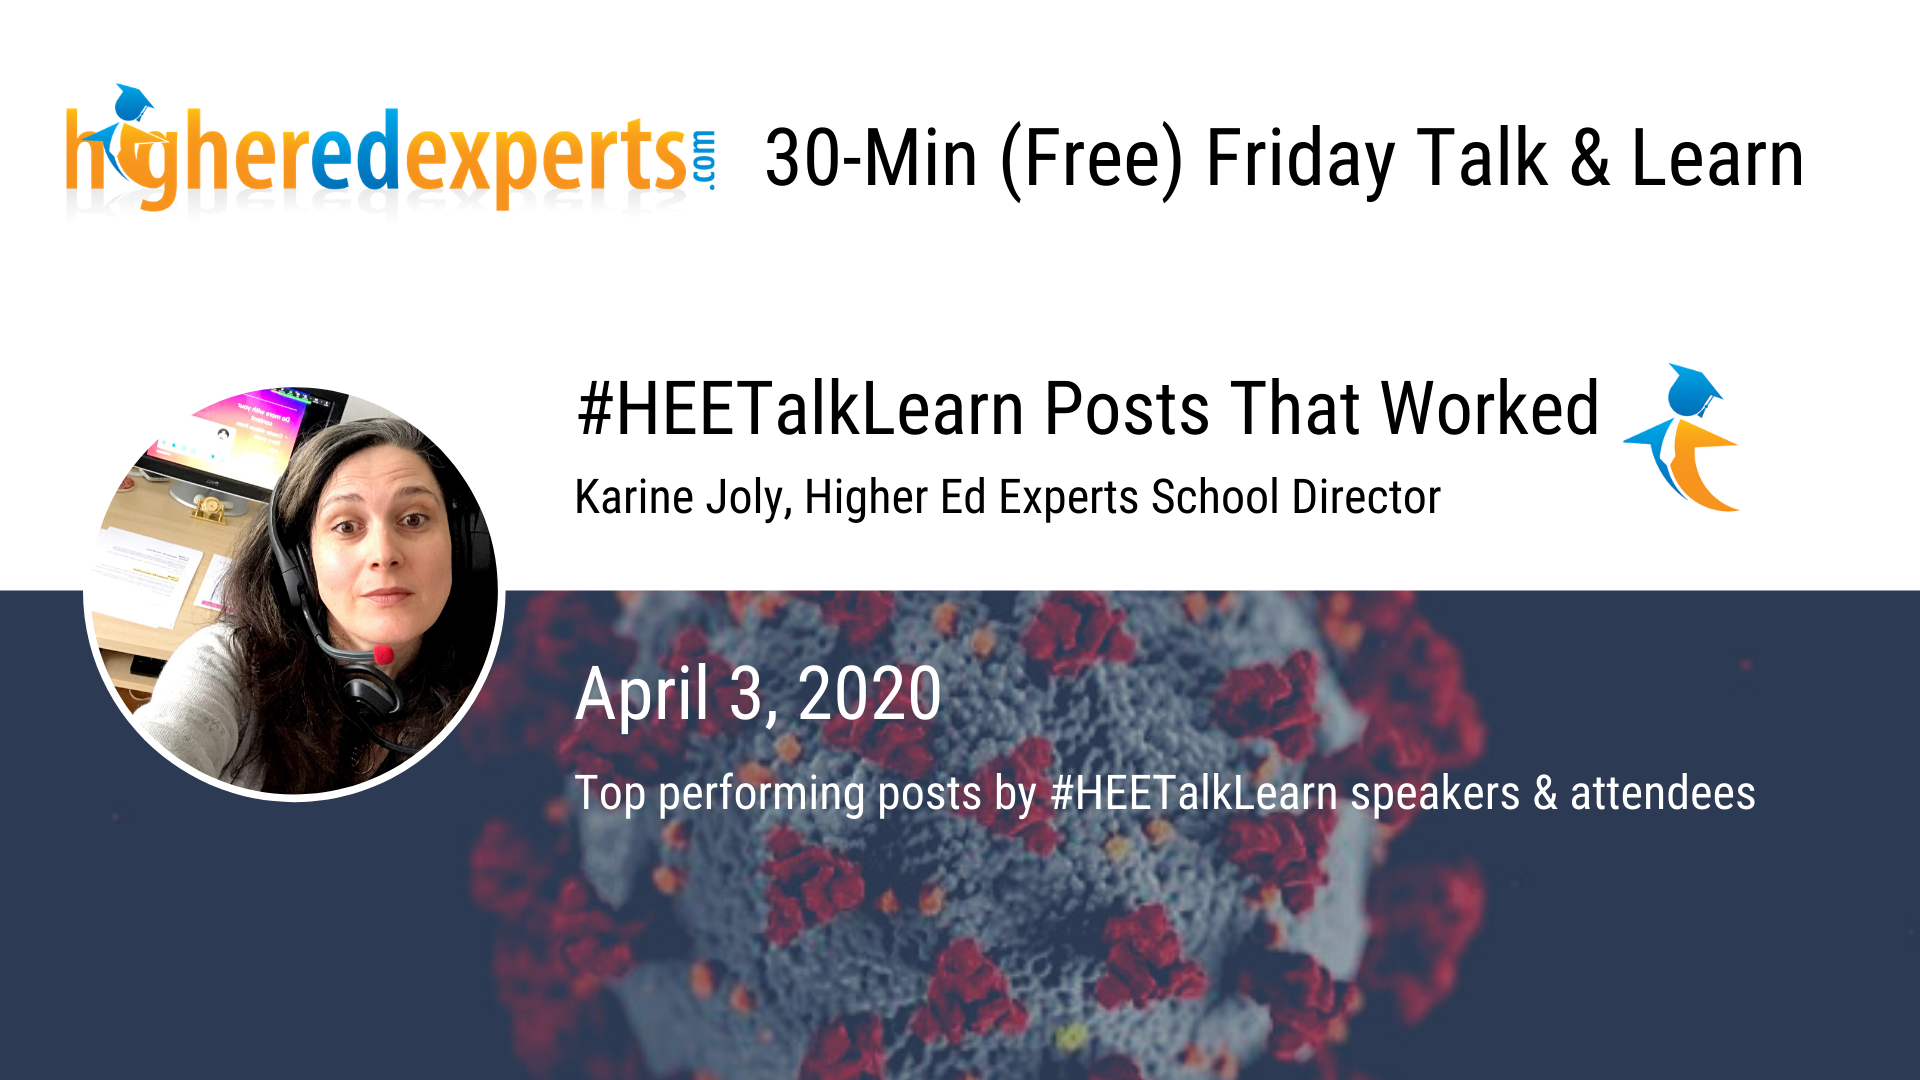 #HEETalkLearn Posts that Worked (April 3, 2020)